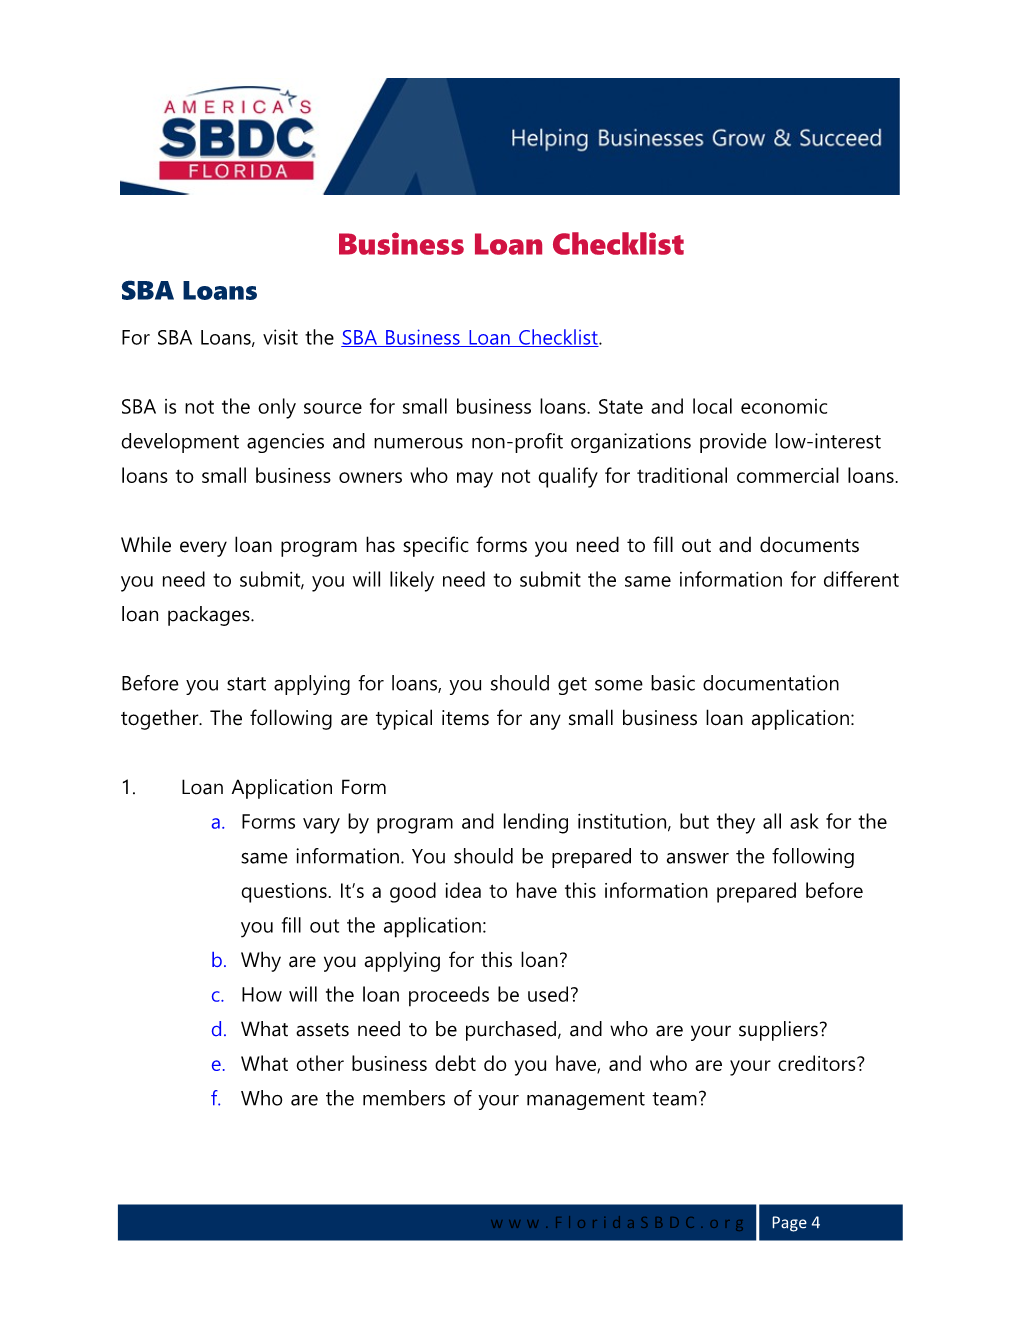 For SBA Loans, Visit Thesba Business Loan Checklist